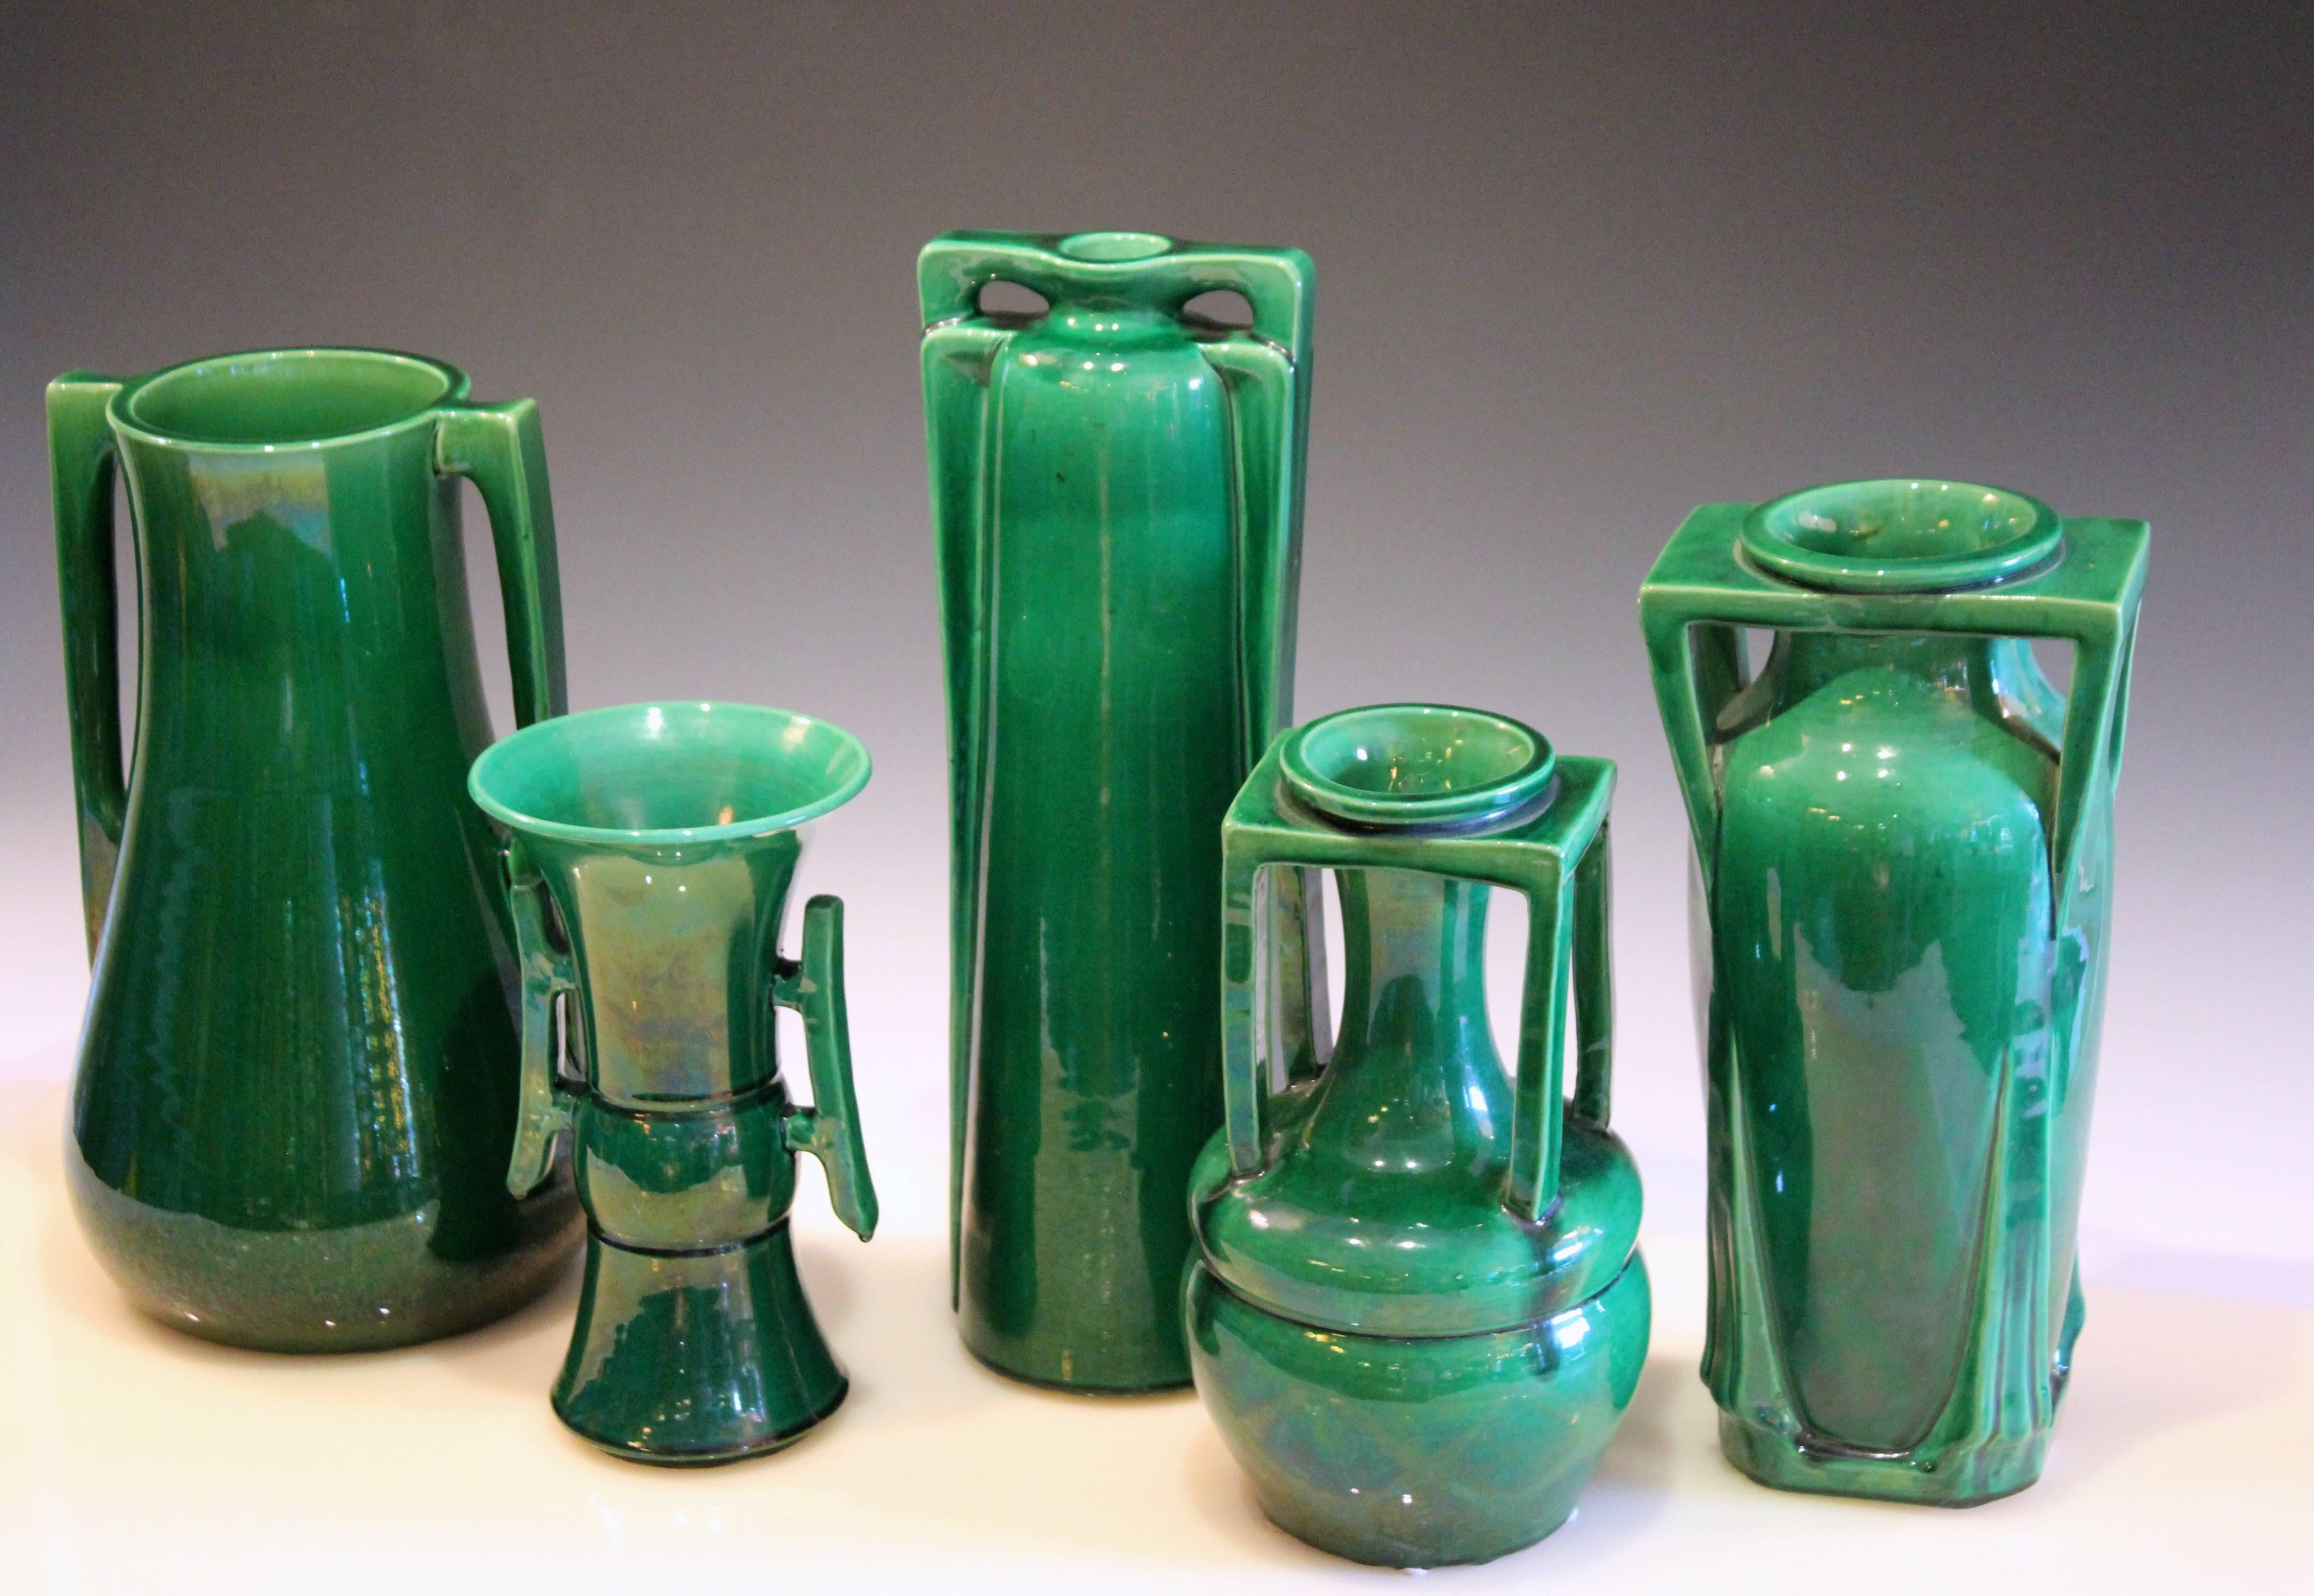 Collection of five Awaji Pottery period Art Deco vases in great architectural forms with sleek green monochrome glaze, circa 1920. 8 3/4